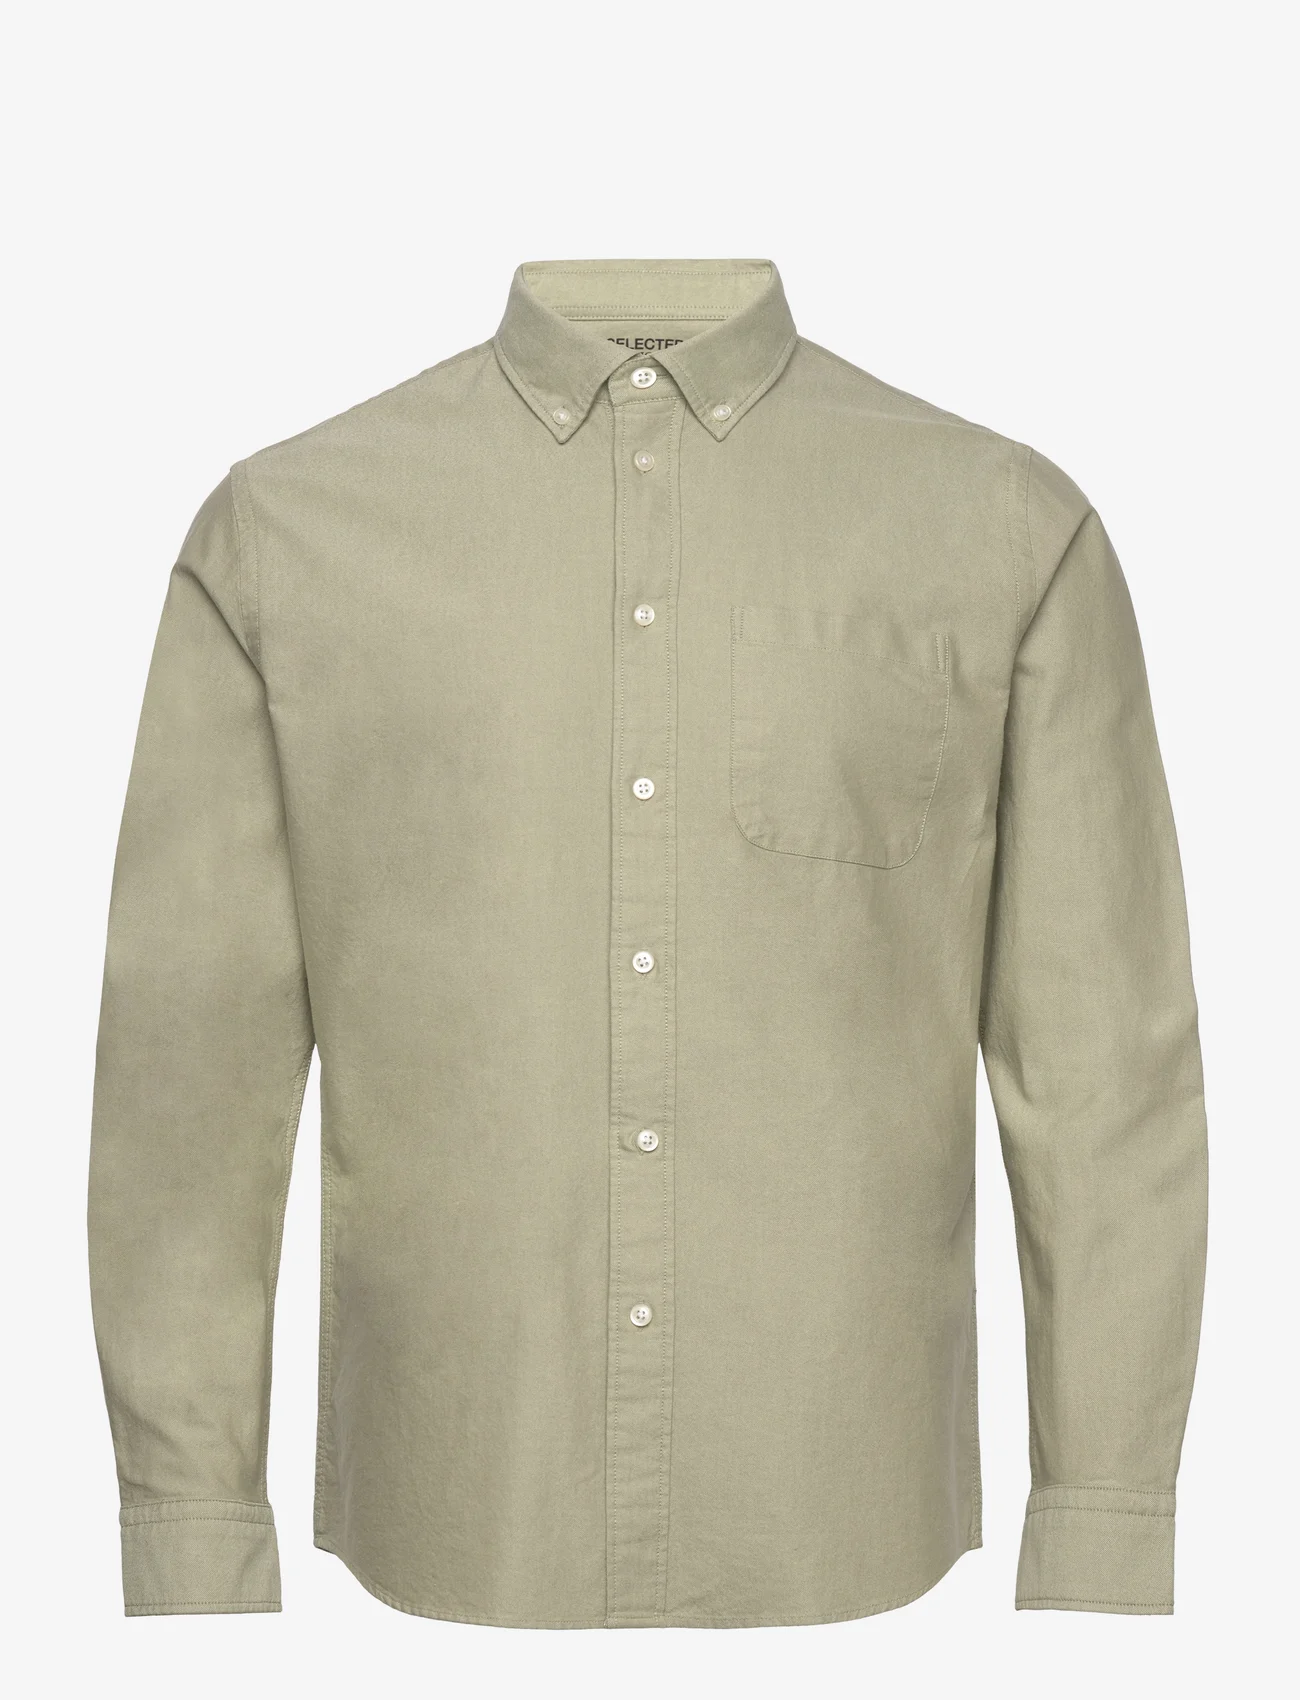 Selected Homme - SLHREGRICK-OX SHIRT LS NOOS - oxford-hemden - vetiver - 0